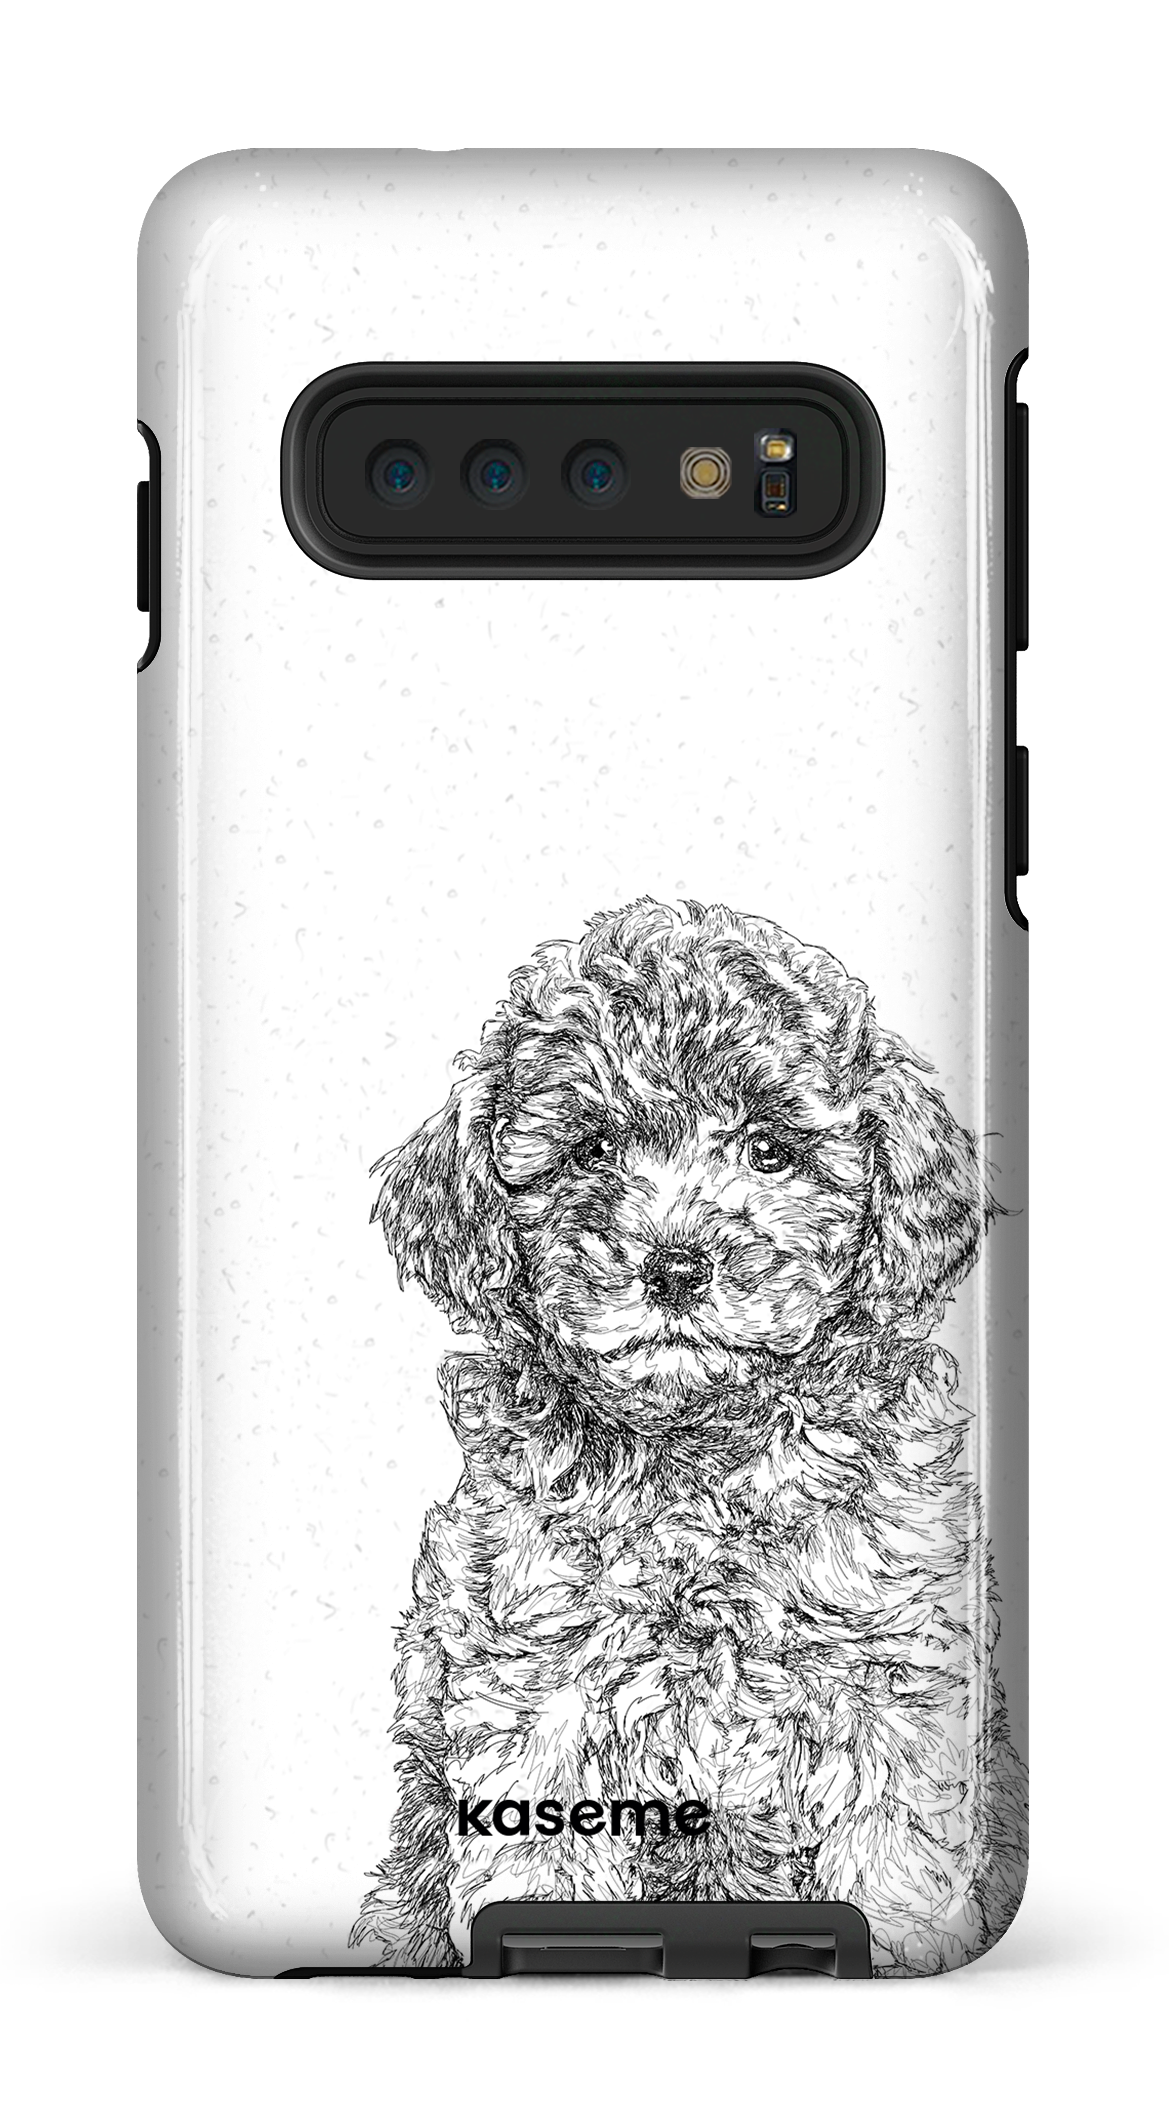 Toy Poodle - Galaxy S10